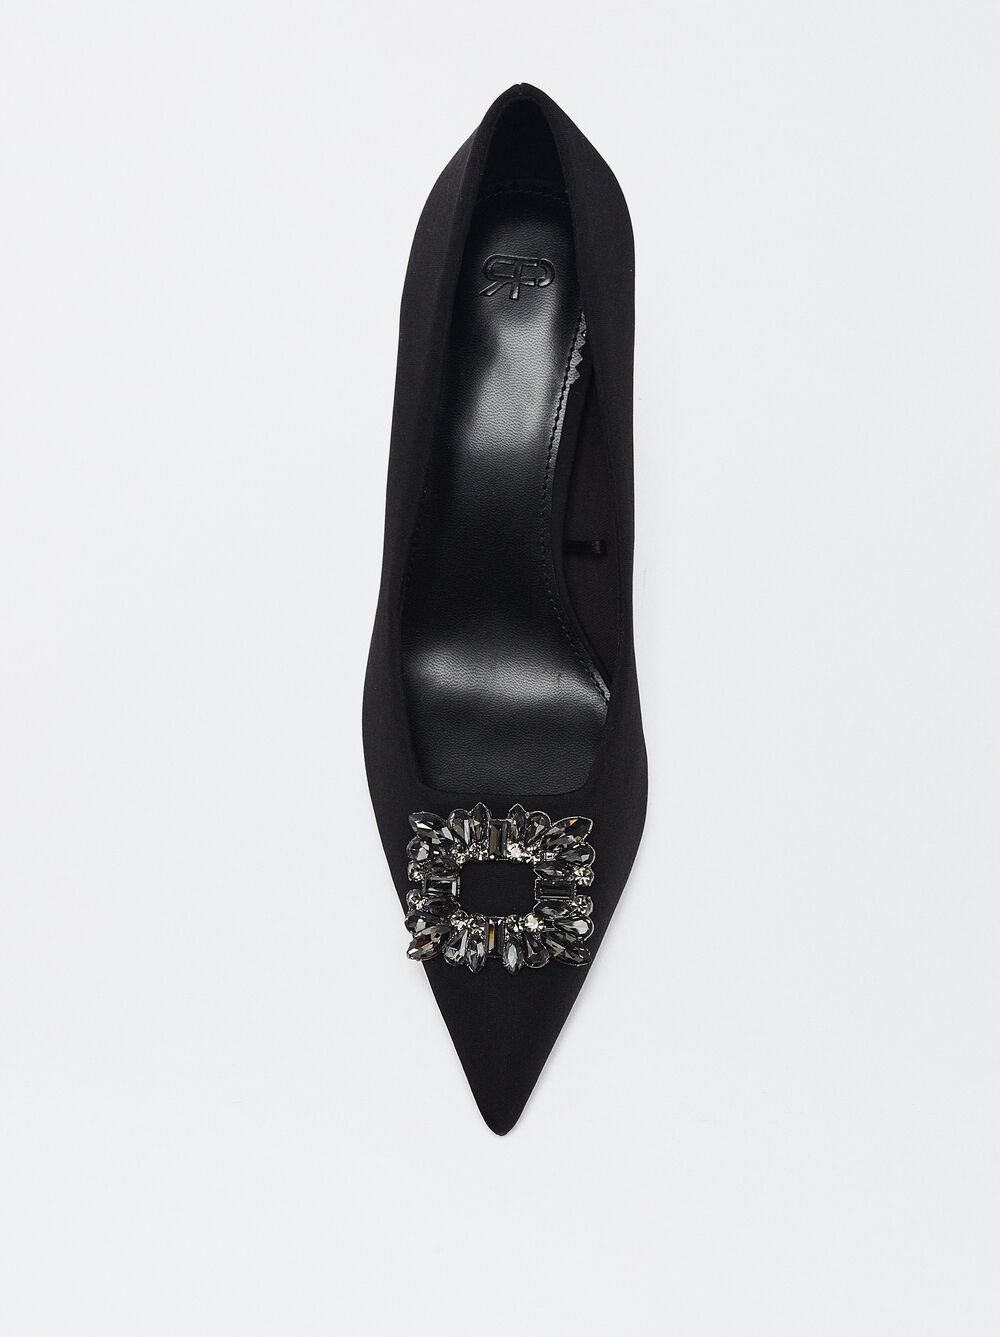 Heeled Shoe With Adornment